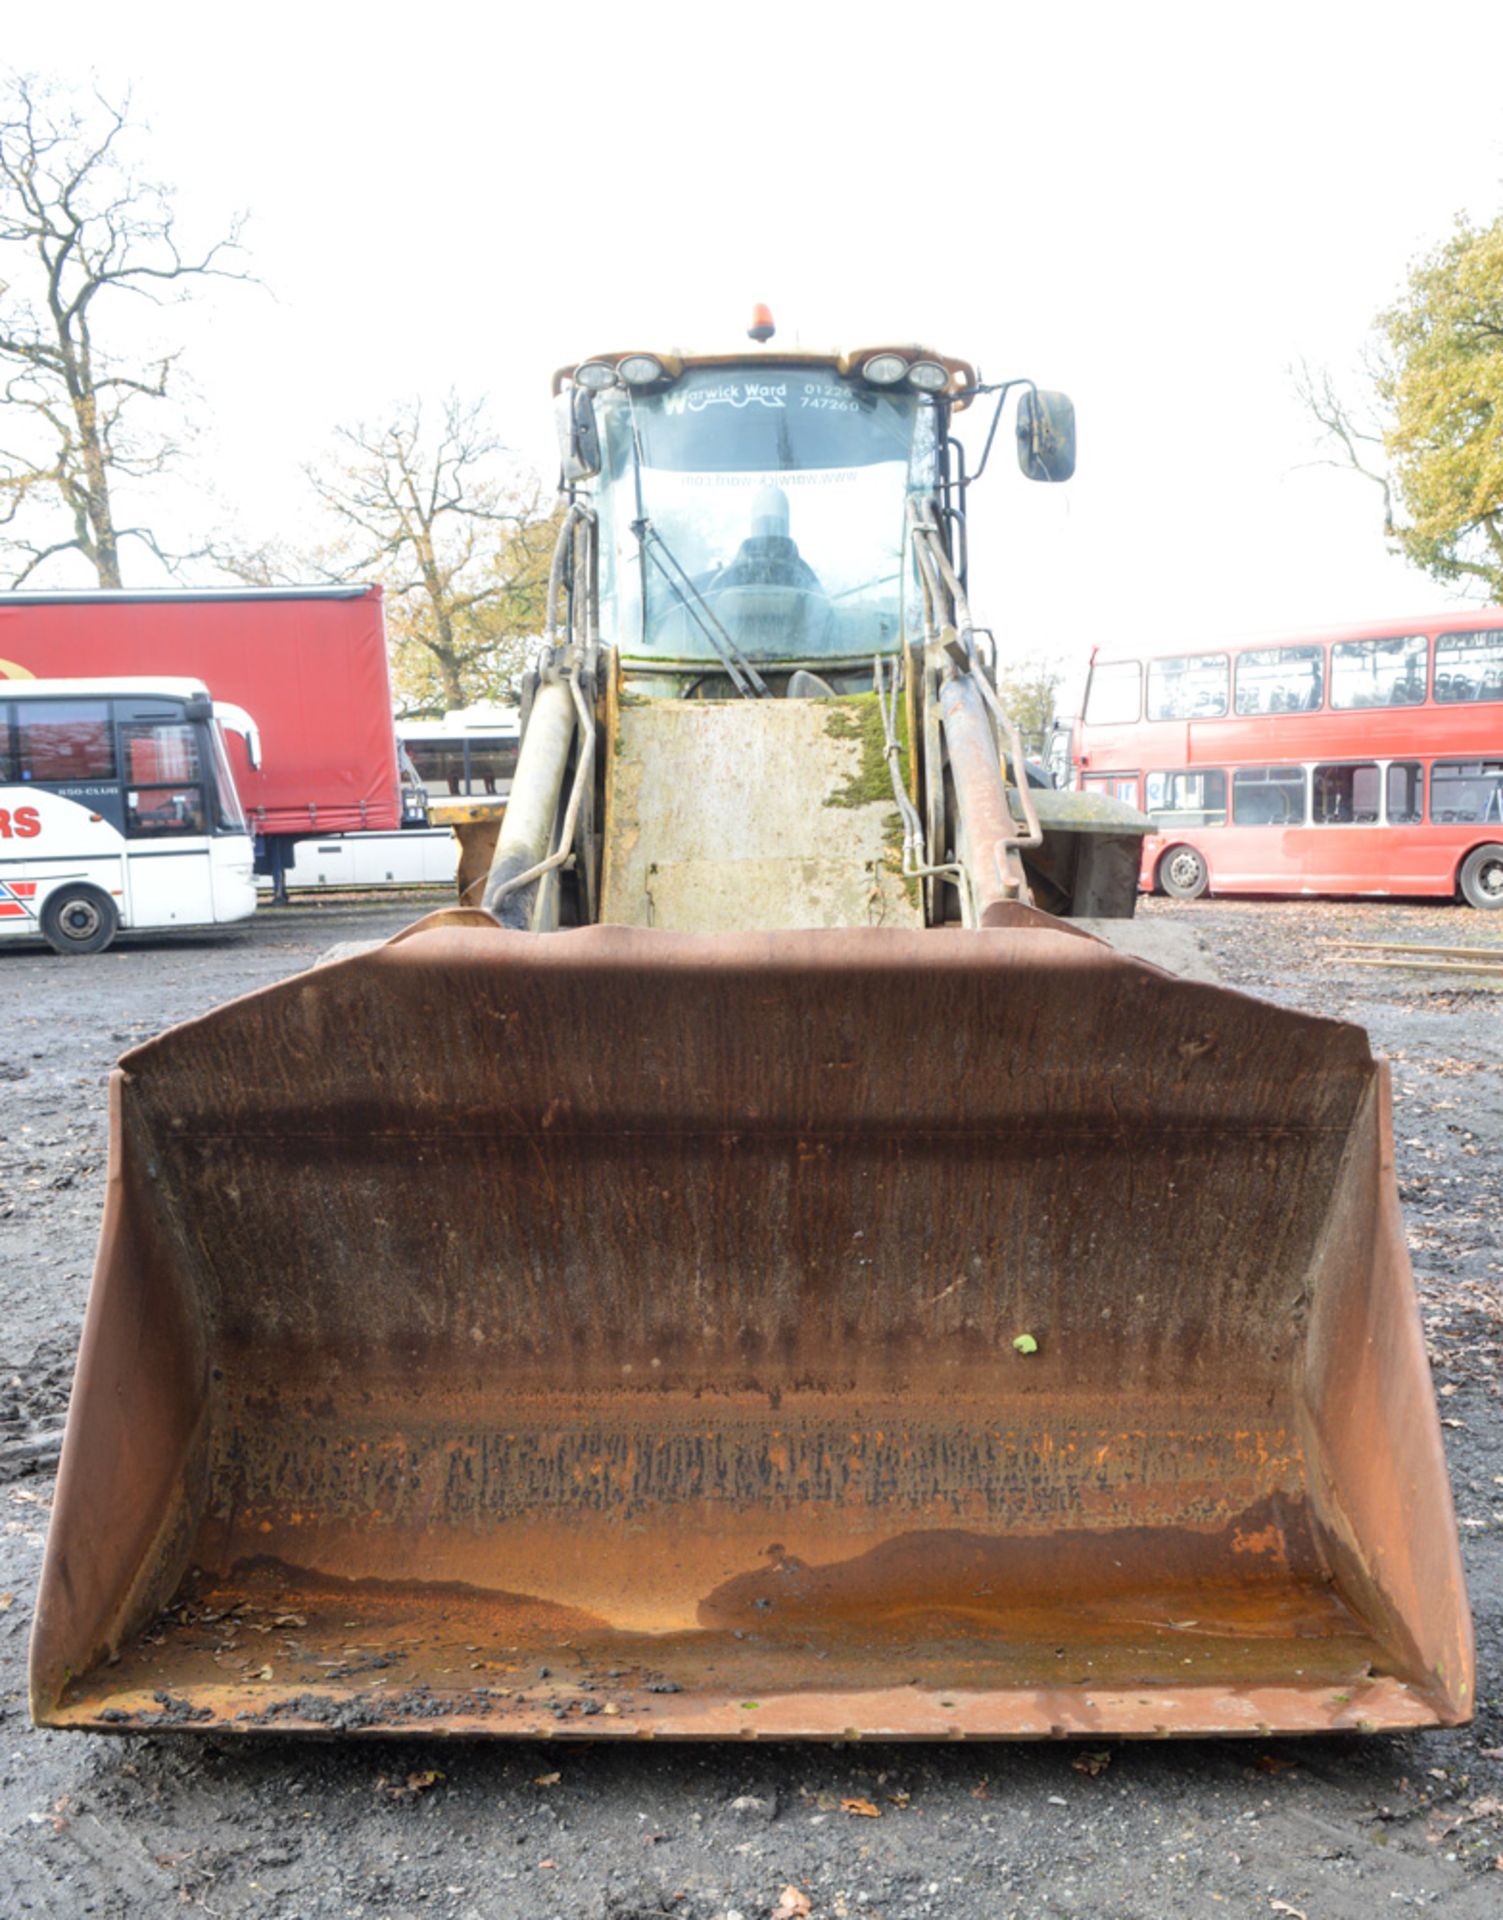 JCB 436E HT loading shovel Year: 2007 S/N: 1410067 Recorded Hours: 12,212 ** Sold as a non runner - Image 5 of 10